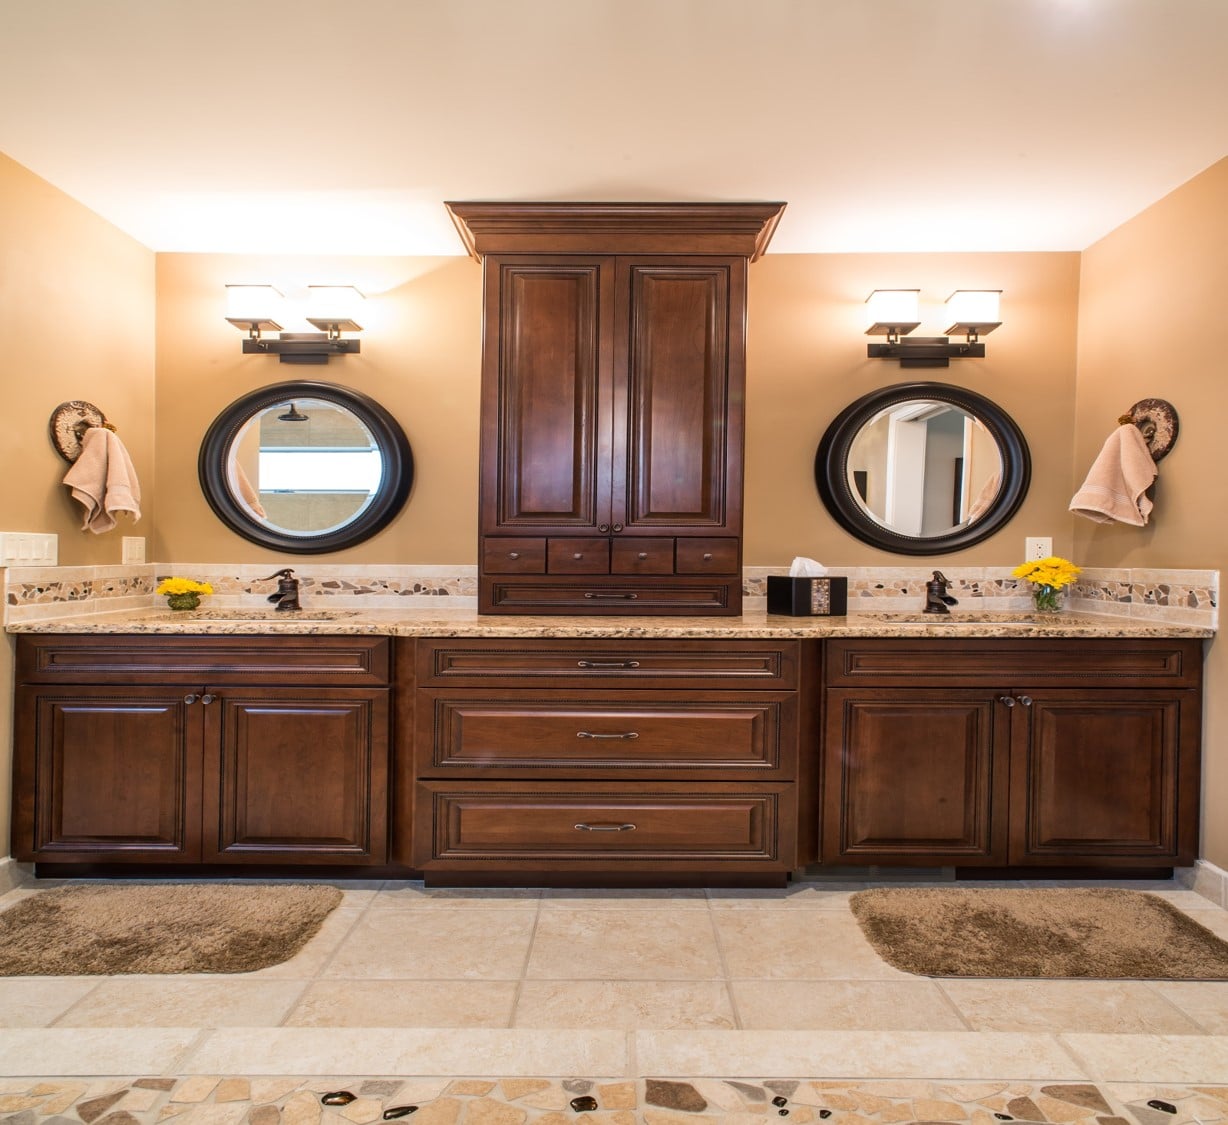 Add Value to Your Home With a Remodeled Bathroom